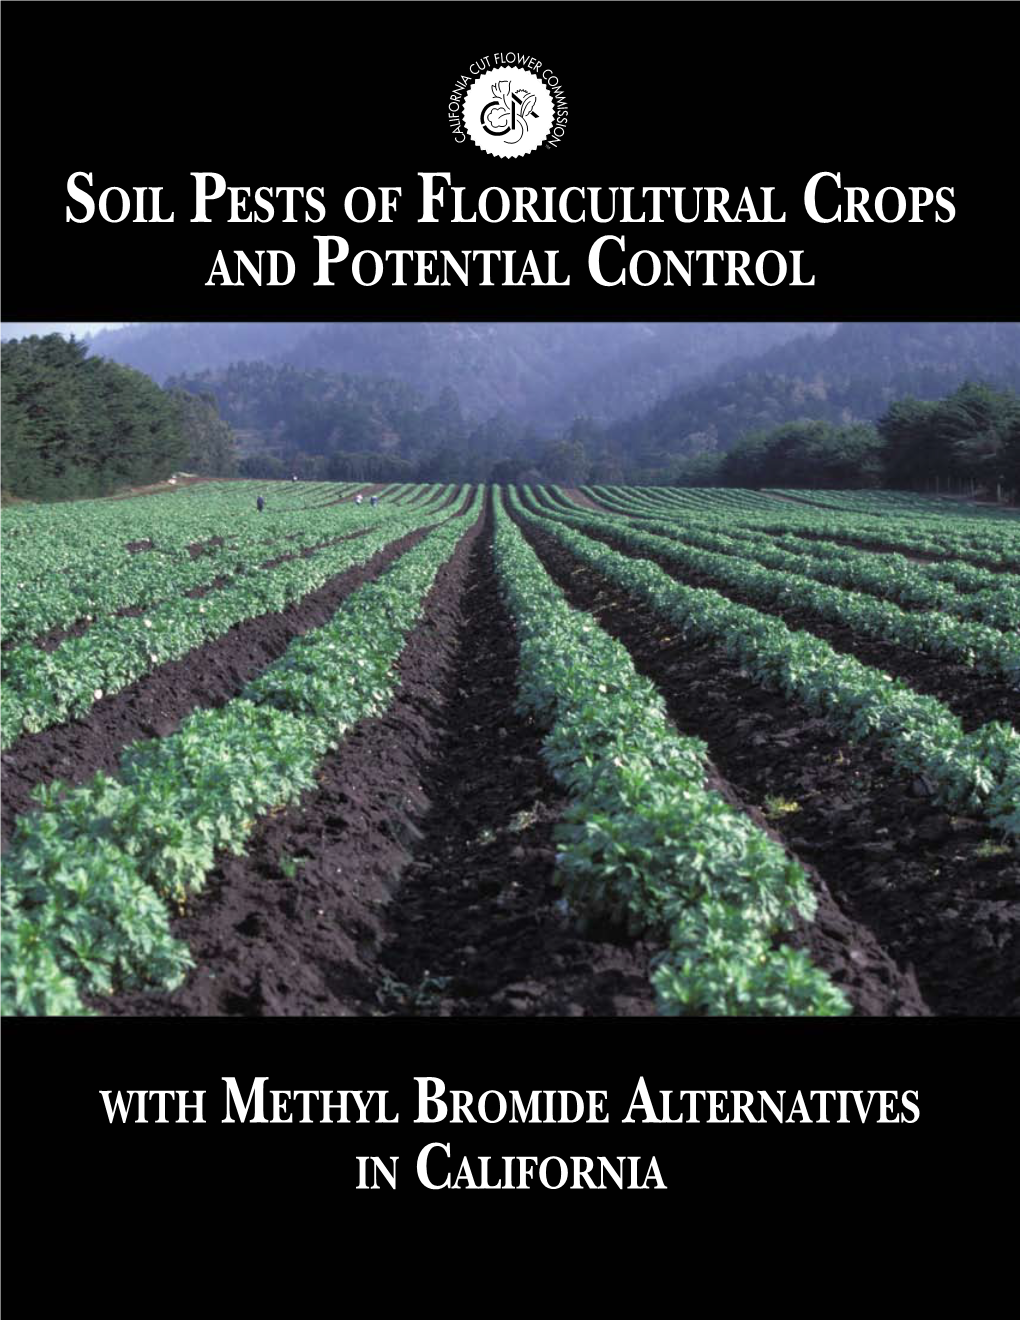 Soil Pests of Floricultural Crops and Potential Control